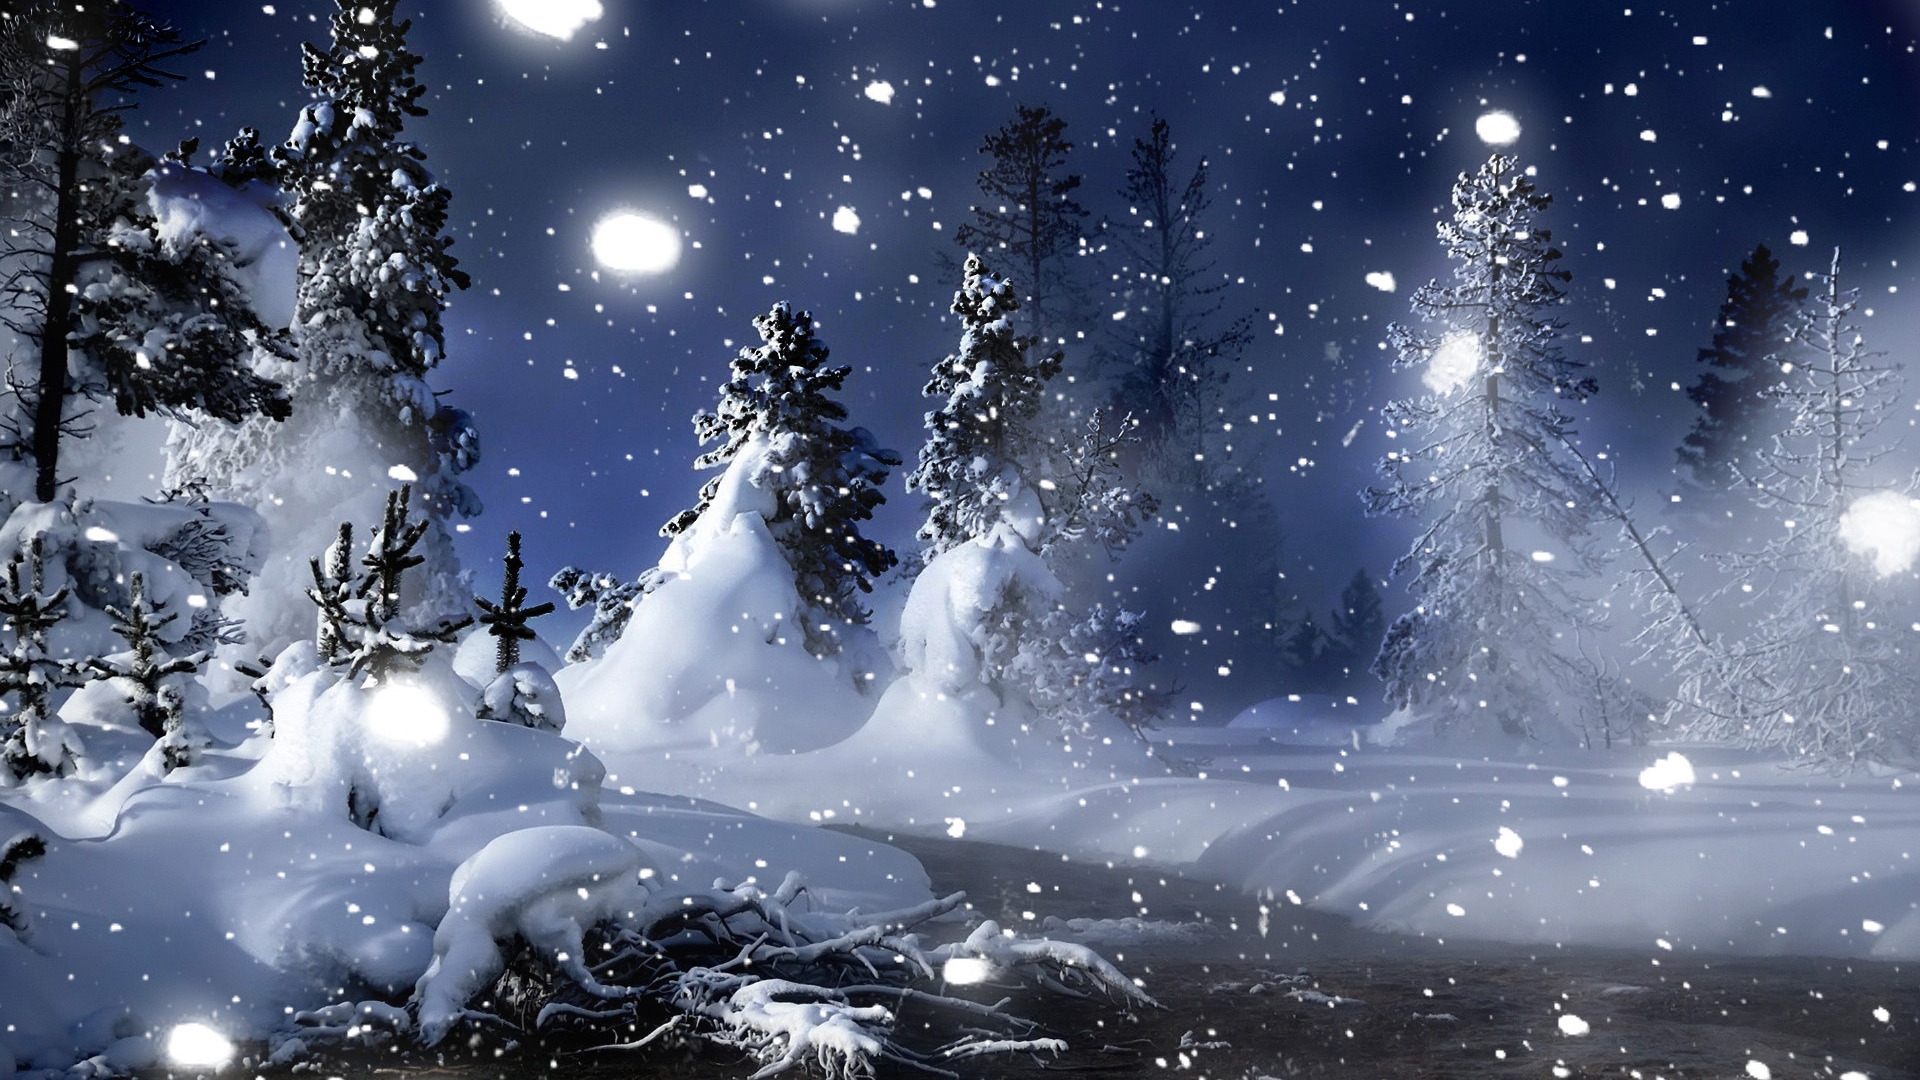 Winter Night in Park for 1920 x 1080 HDTV 1080p resolution